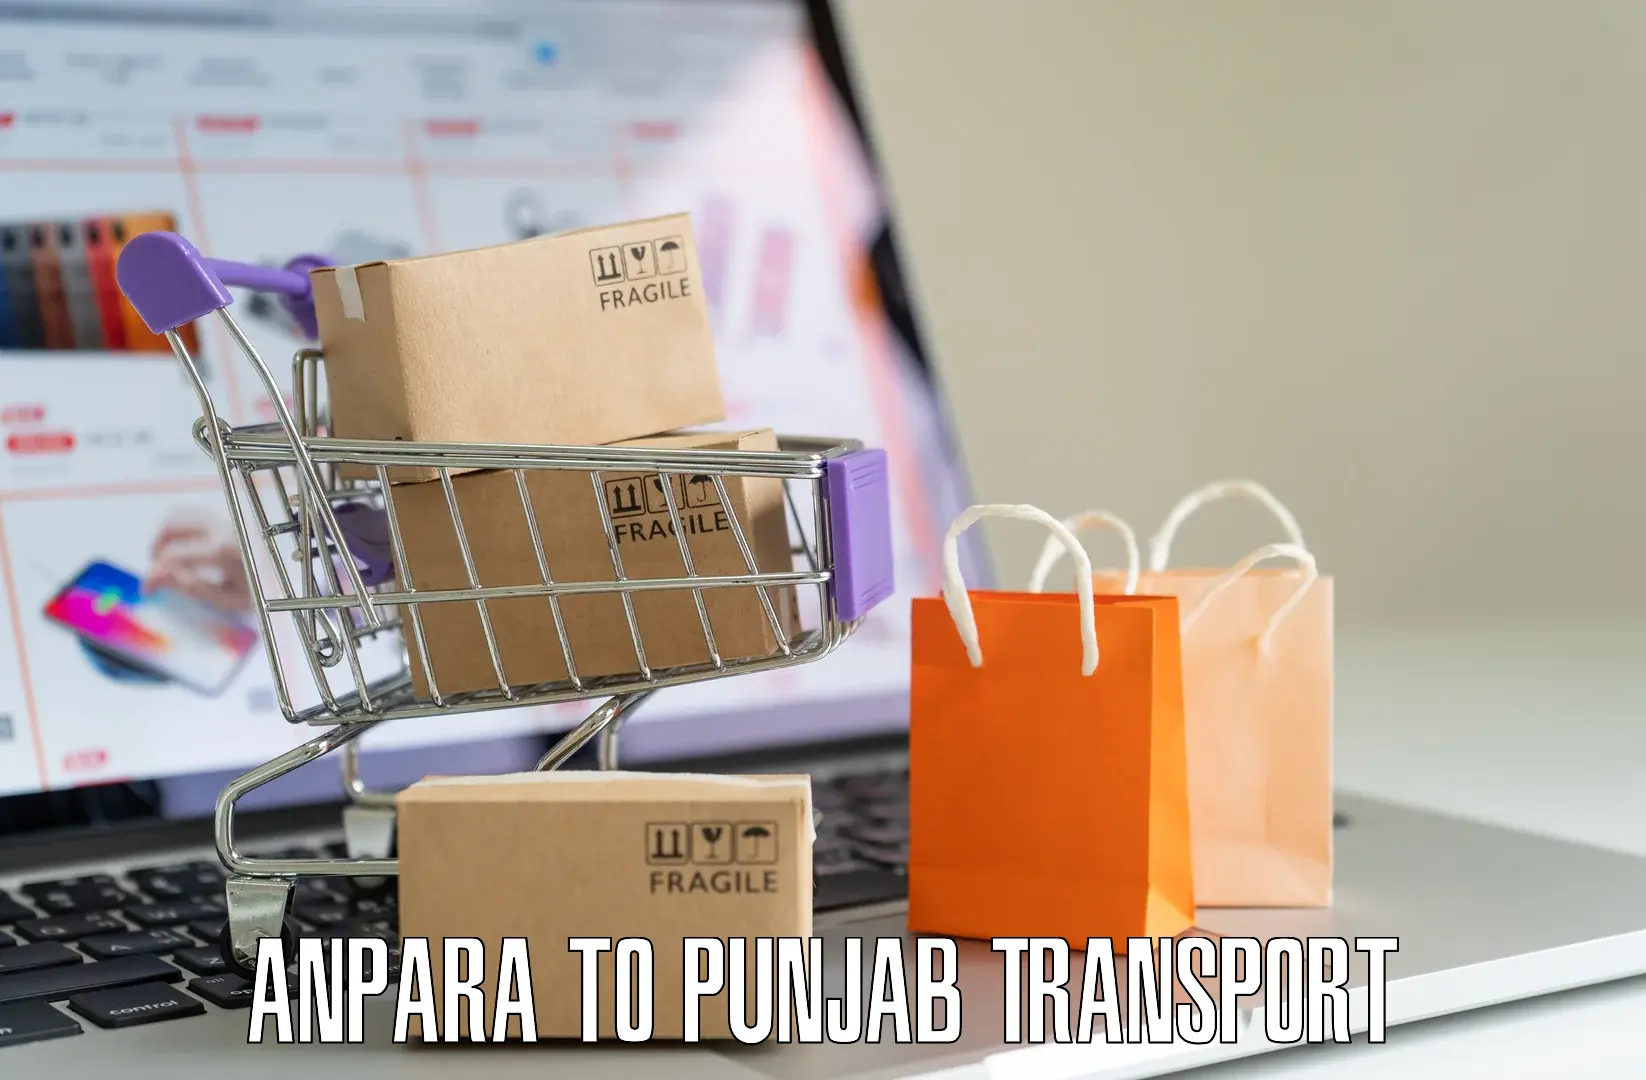 Vehicle transport services Anpara to Sultanpur Lodhi